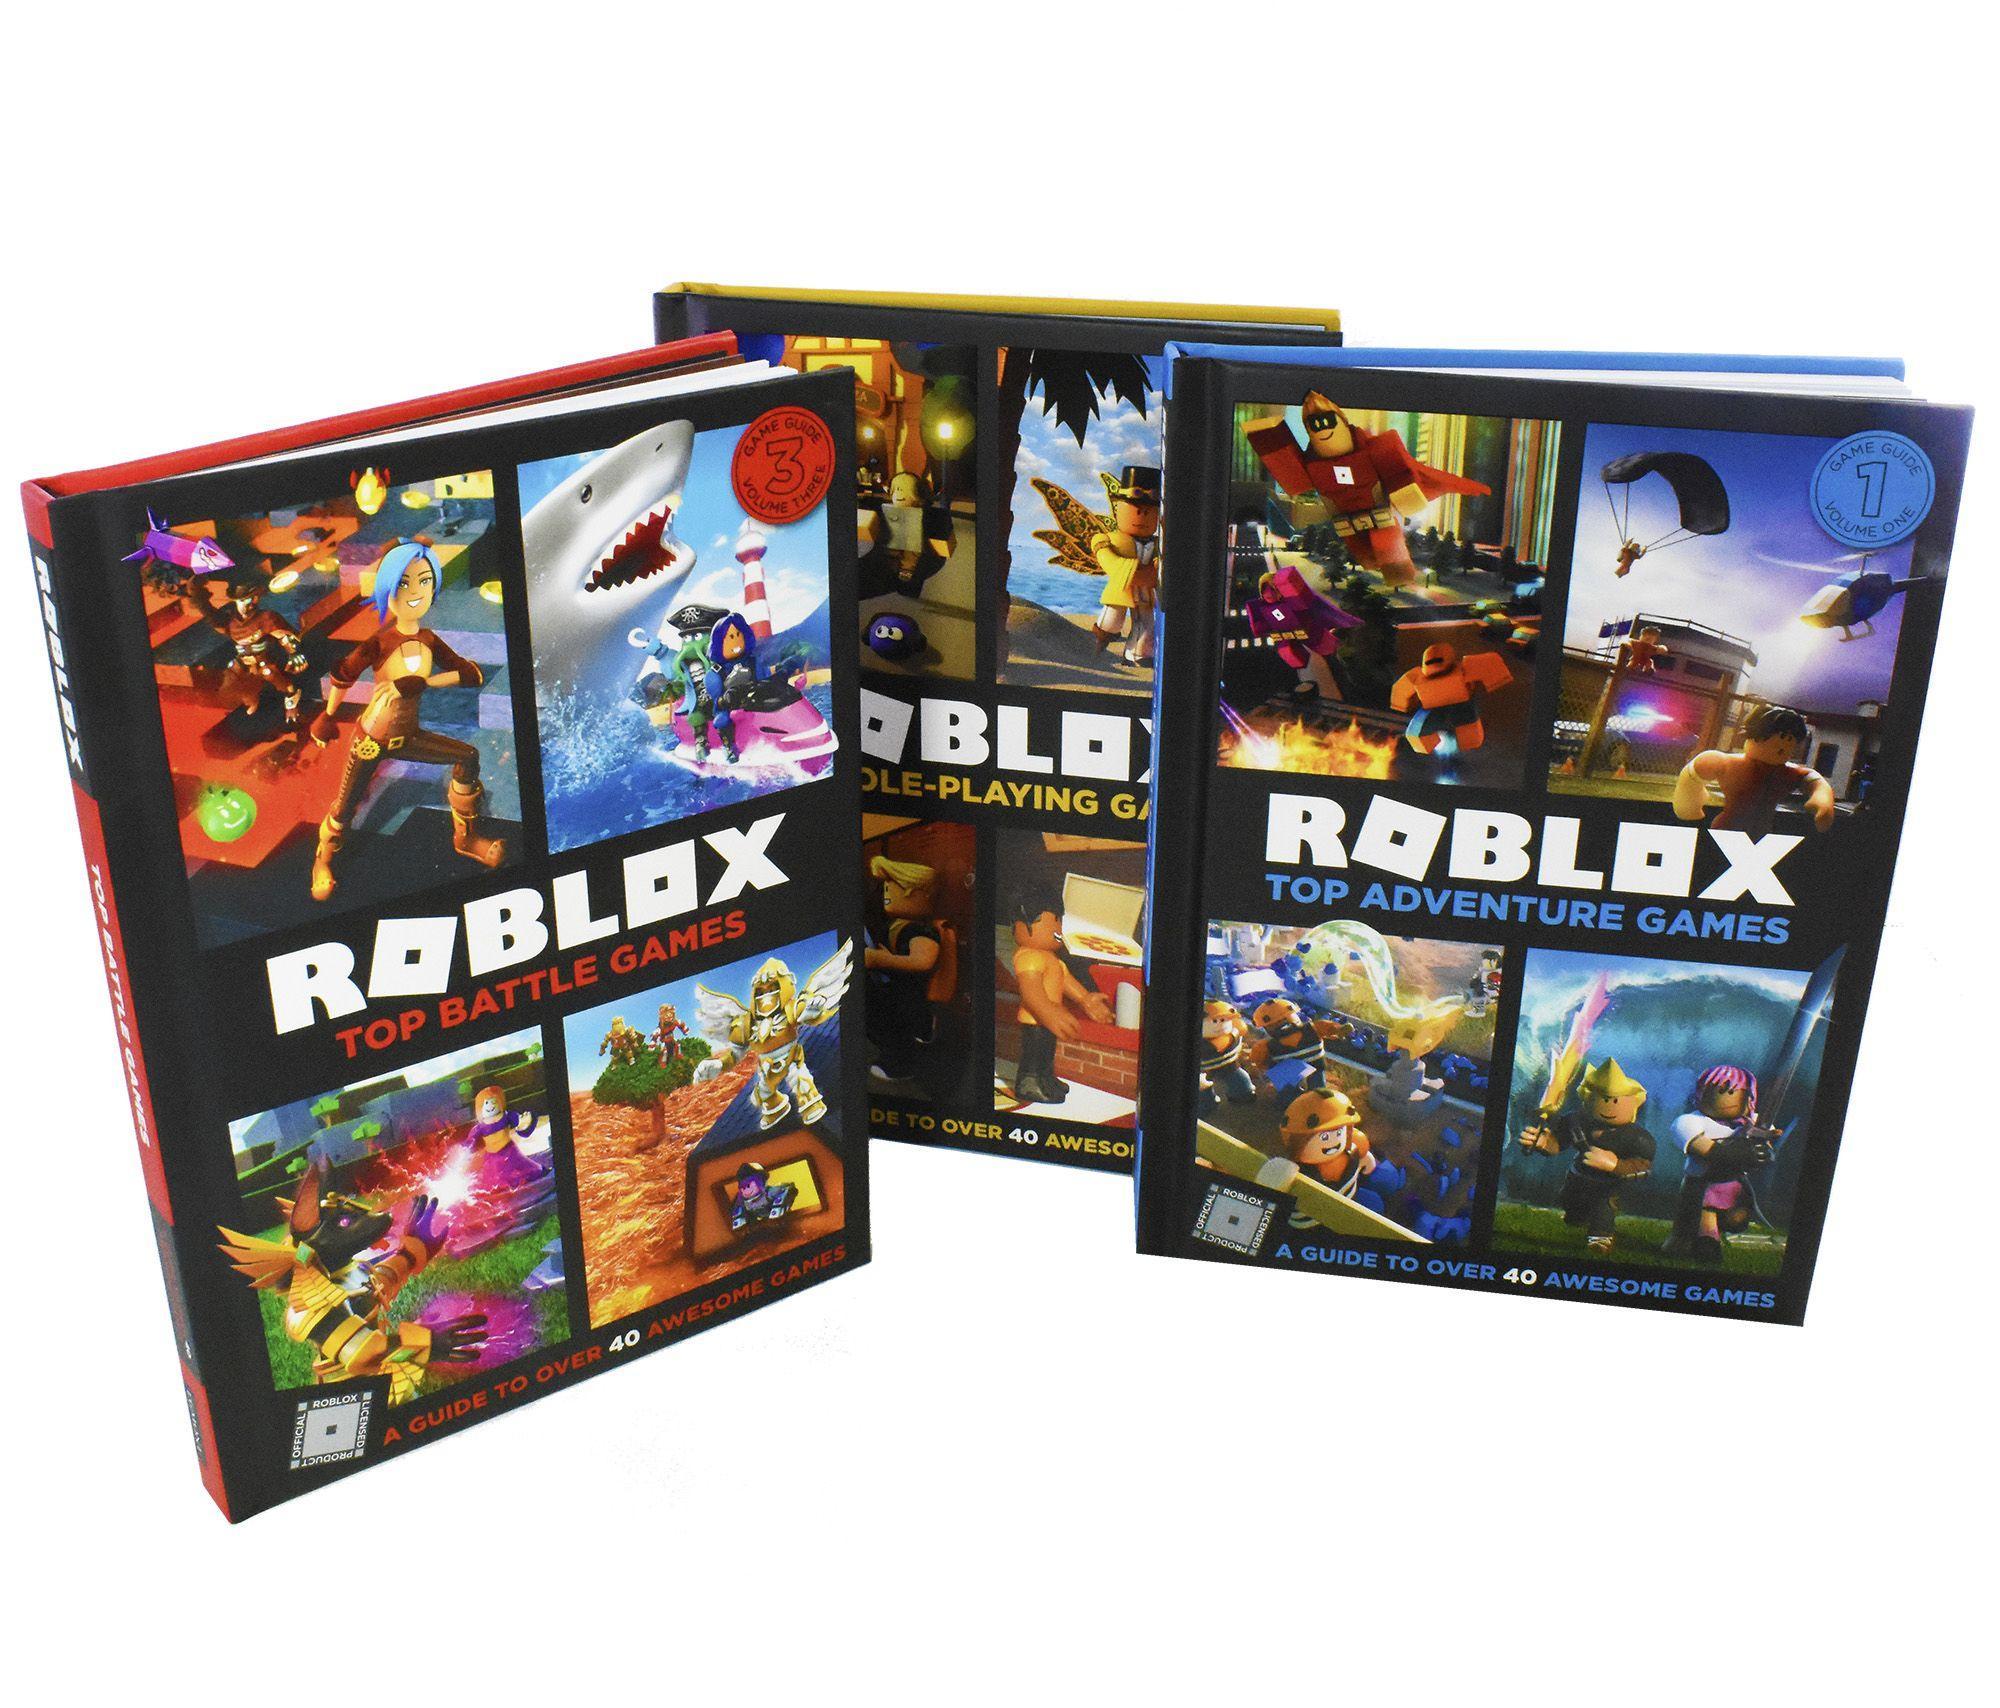 Roblox Ultimate Guide 3 Books Children Collection Gaming Paperback Books2door - roblox top battle games egmont